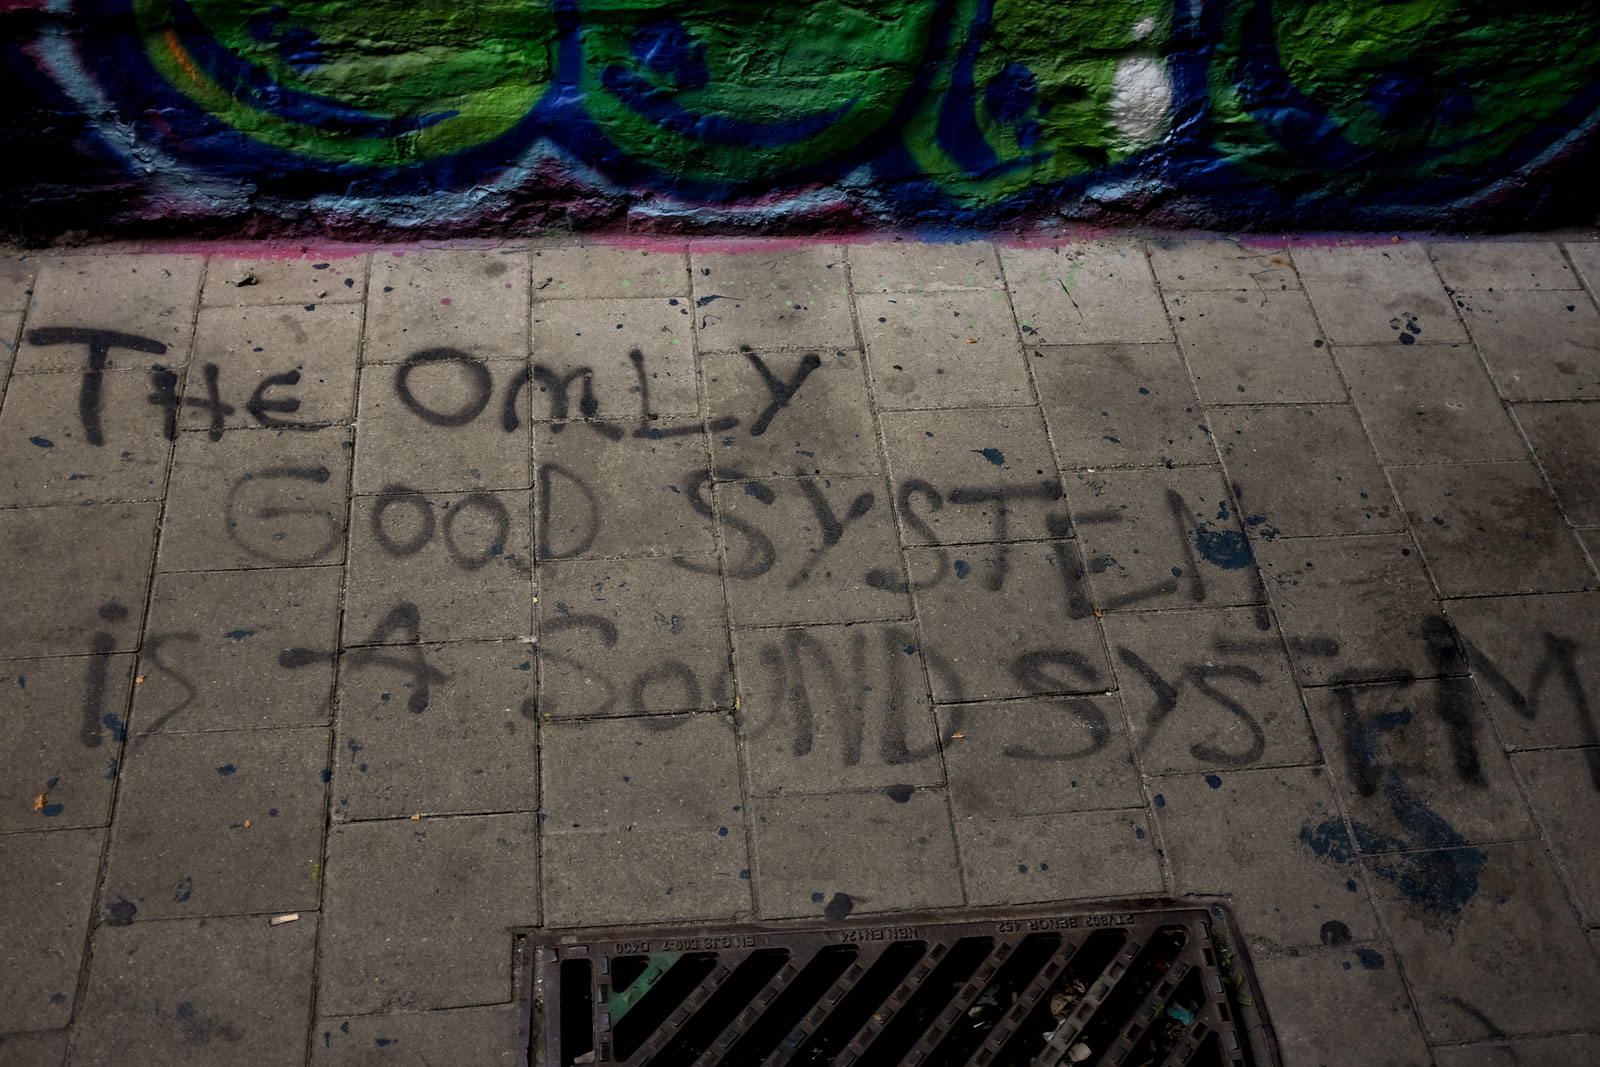 Graffiti on the Graffiti Street in Ghent that reads "The only good system is a sound system"